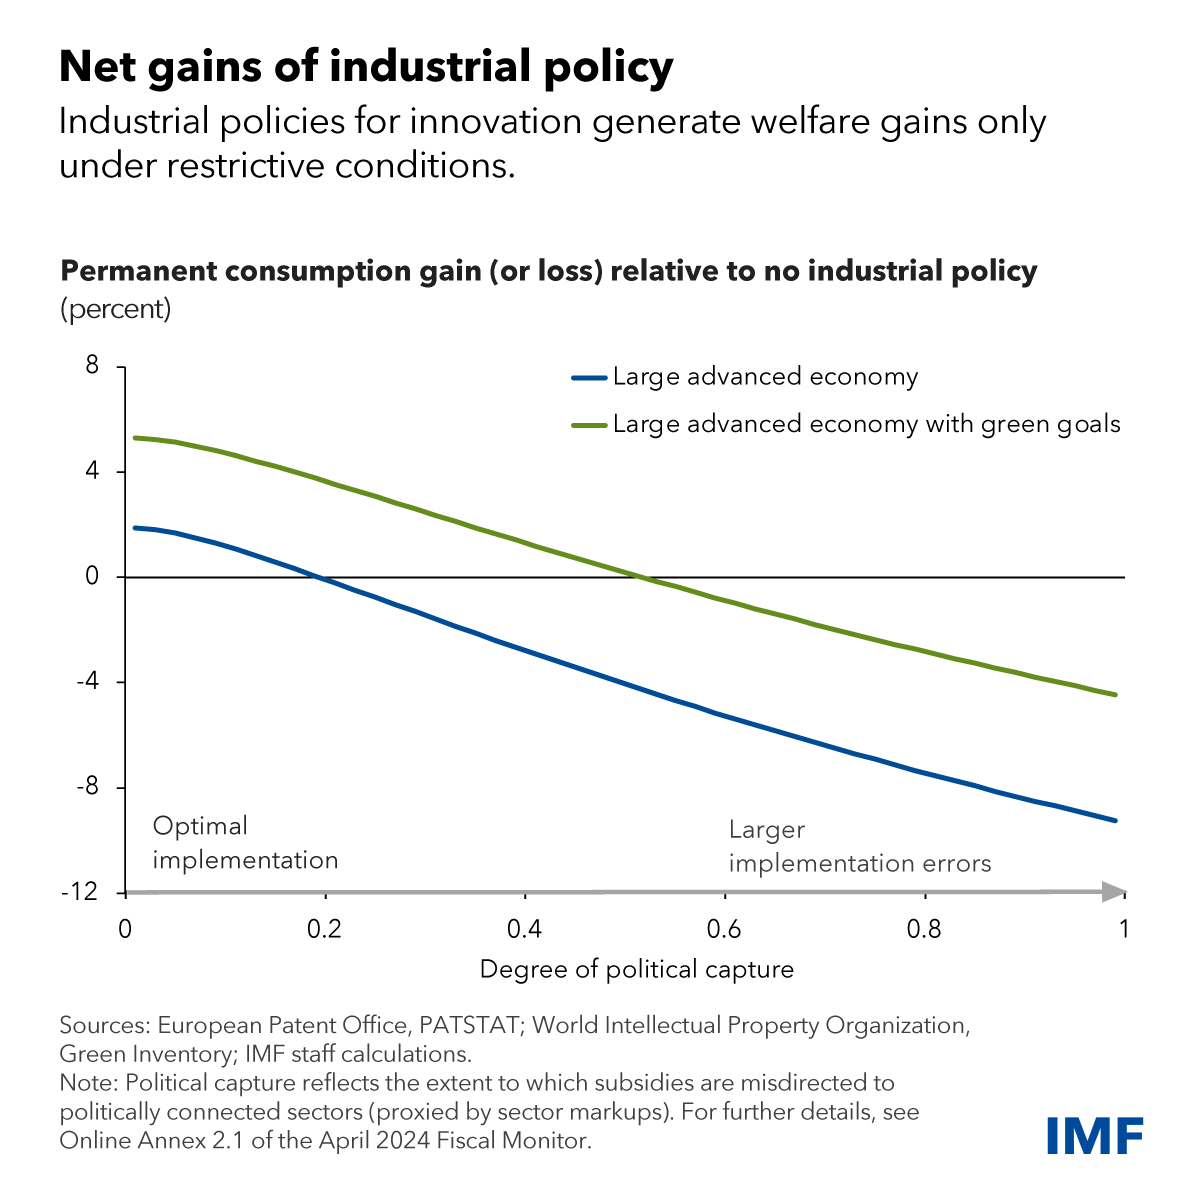 Industrial policy is back in vogue, but new IMF research shows that implementation challenges can lower its economic and social benefits. When special interest groups have too much influence, industrial policy can result in welfare losses. Read more here: imf.org/en/Blogs/Artic…